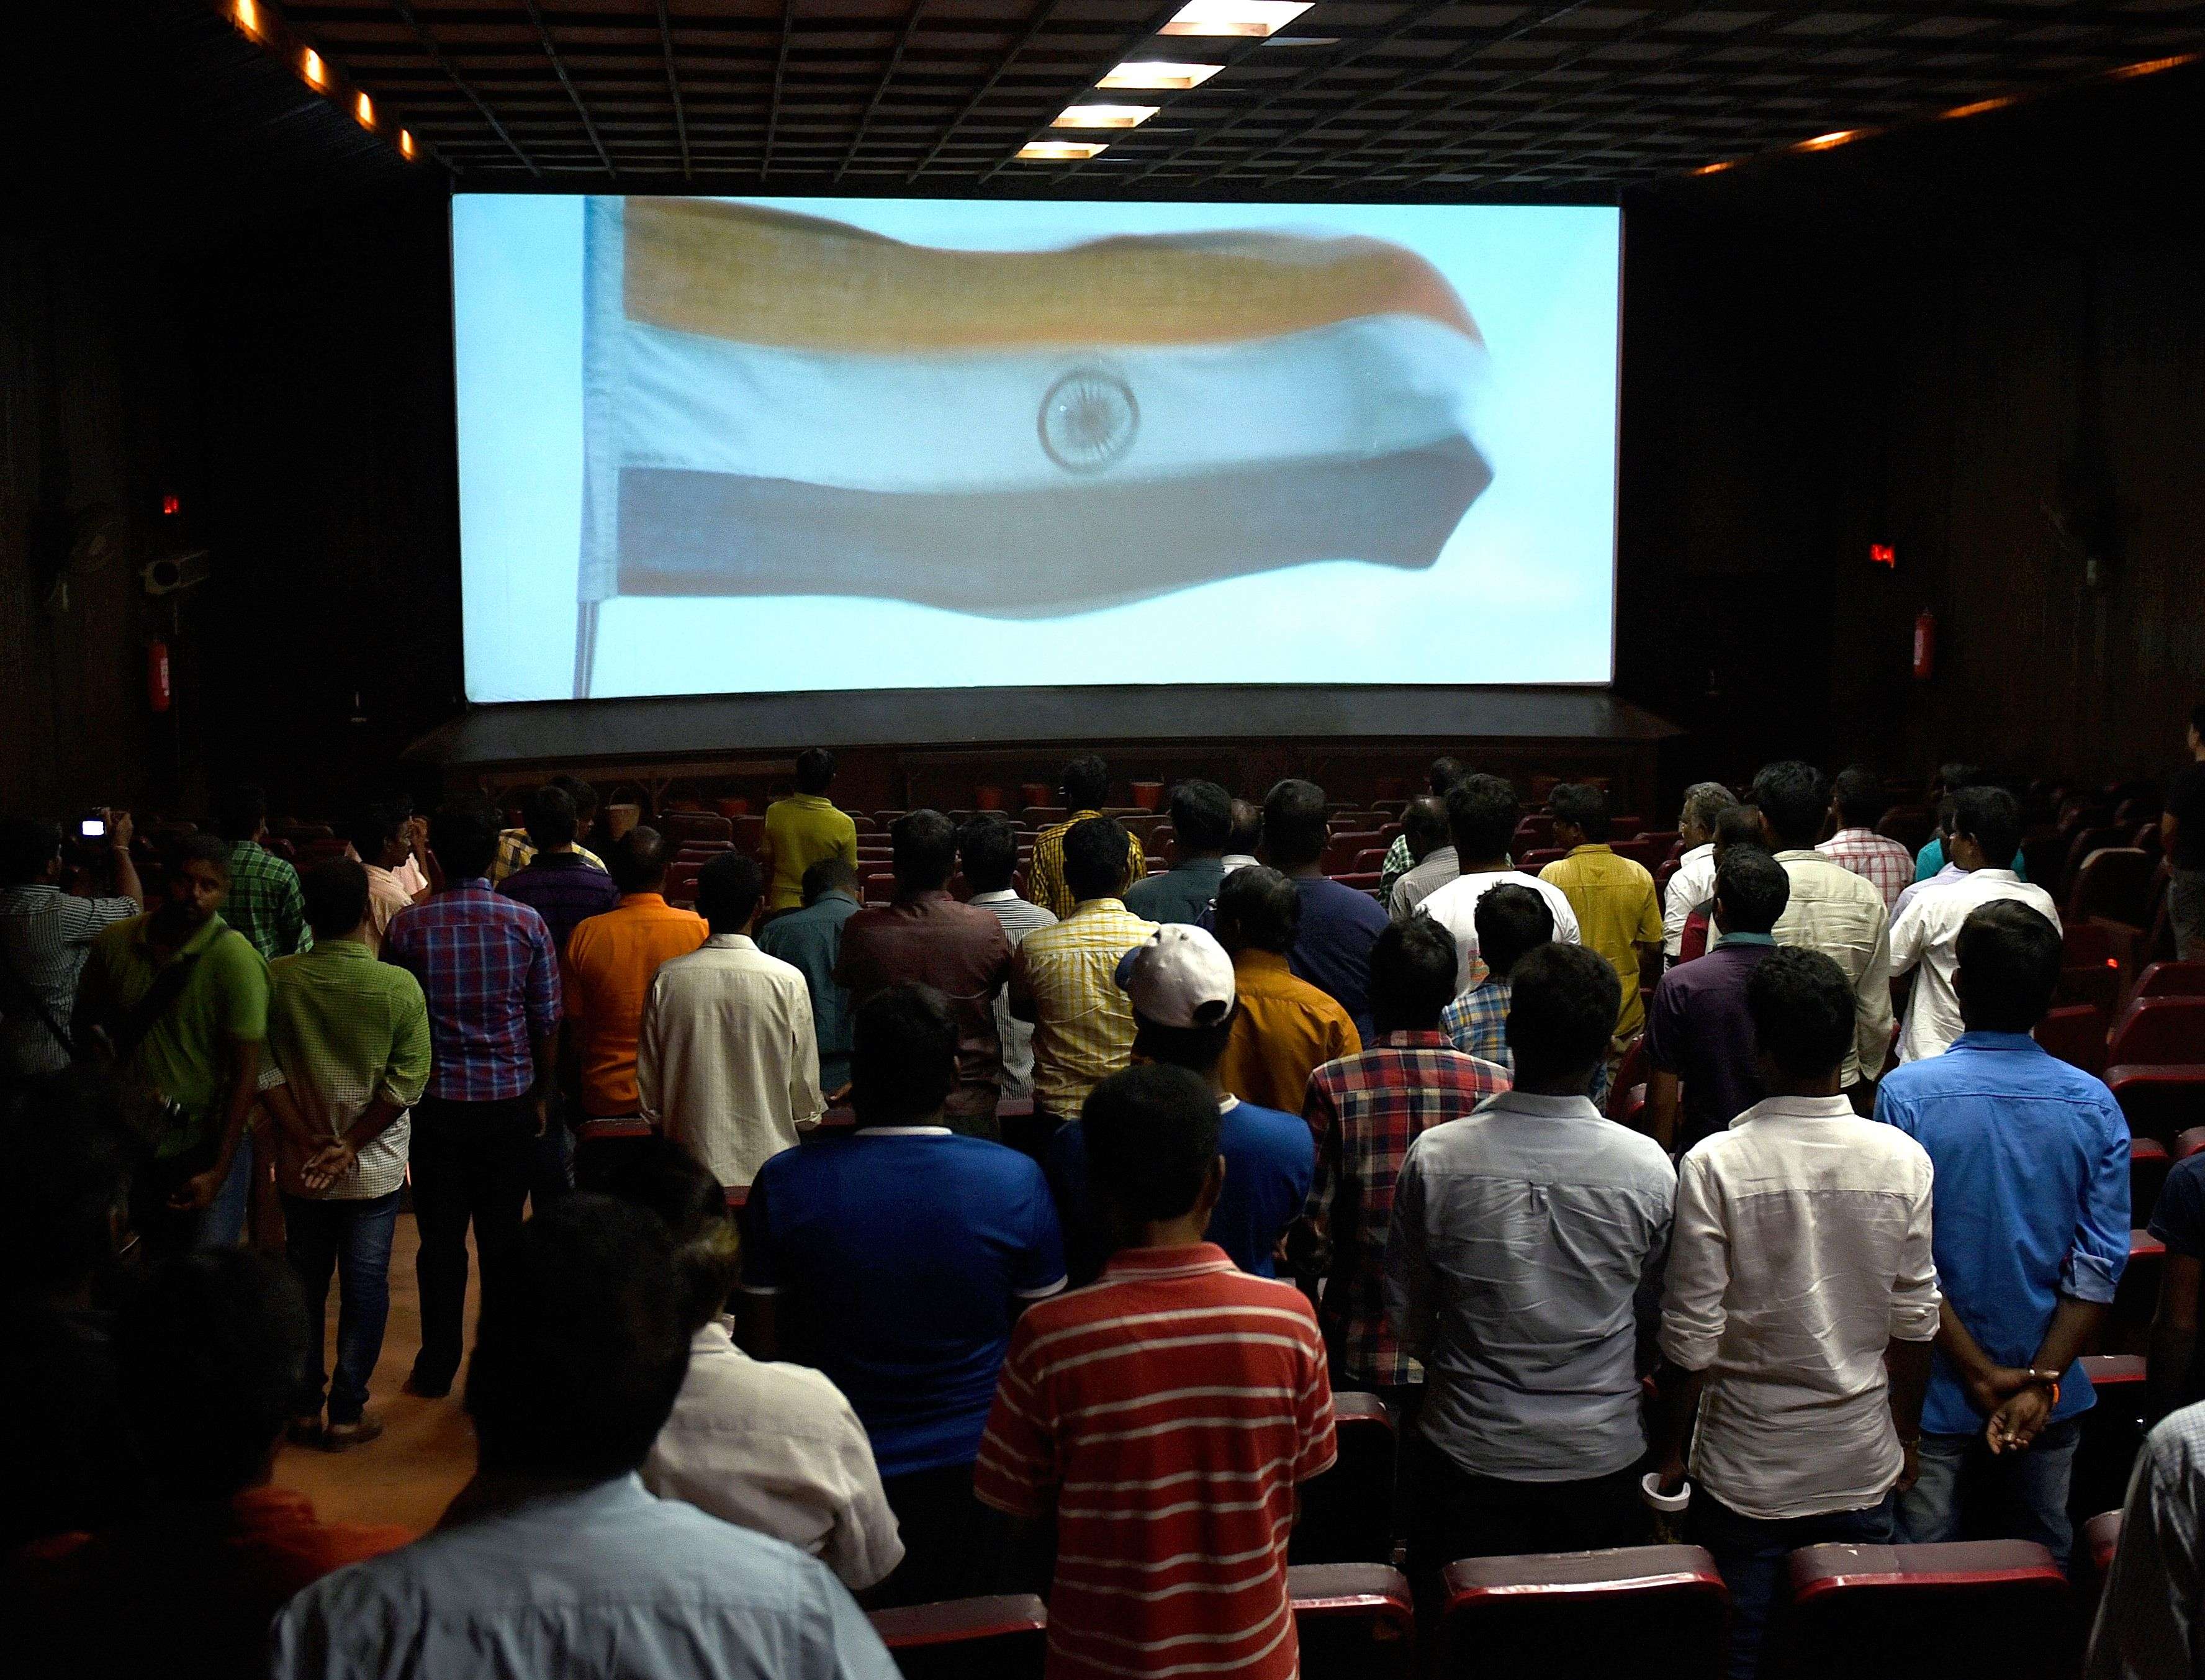 The Supreme Court on Wednesday said the national anthem must be played in all cinema halls across the country before a film is screened and everyone present must stand to pay respect to it. This photo taken during the 3pm show in AVM Rajeswari Theatre at Vadapalani in Chennai on Wednesday. The national anthem has been played in this theatre more than 25 years.  Photo. C Suresh Kumar